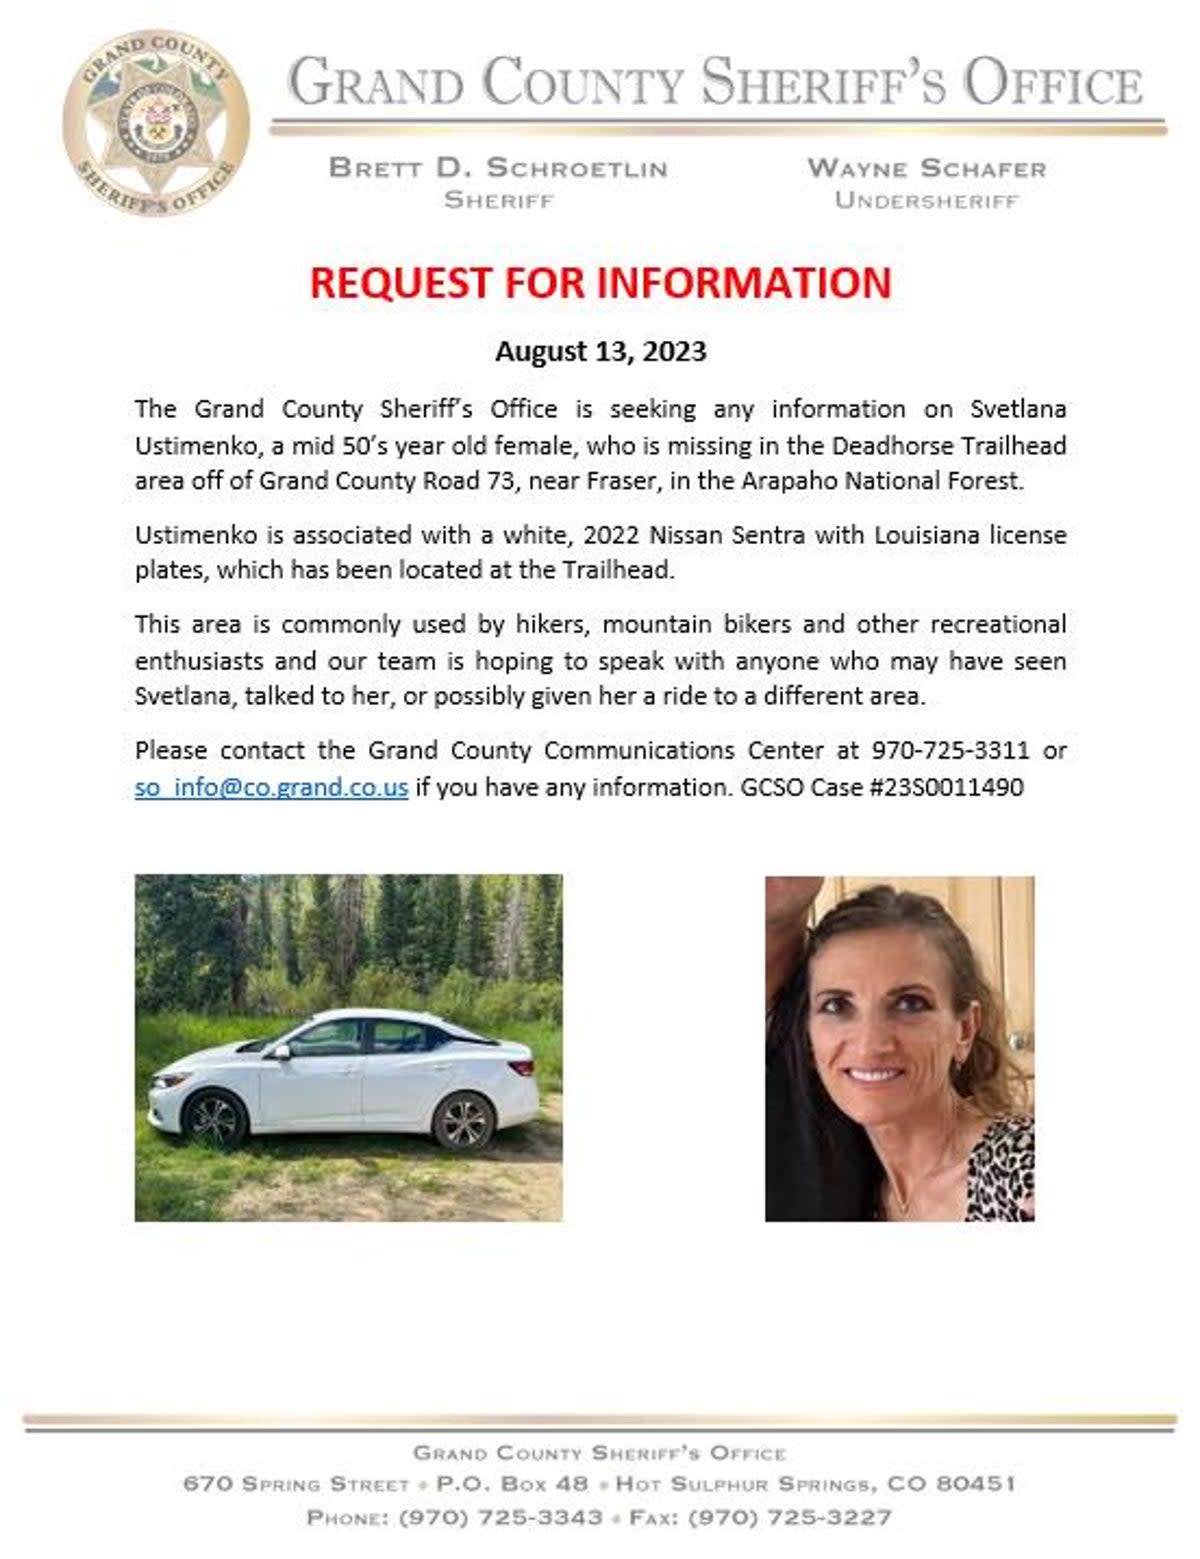 On 11 August, authorities had started a search to find another missing woman, 55-year-old Svetlana Ustimenko after her rental car was found parked at the Deadhorse Trailhead area in the Arapaho National Forest in late July (Grand County Sheriff’s Office)